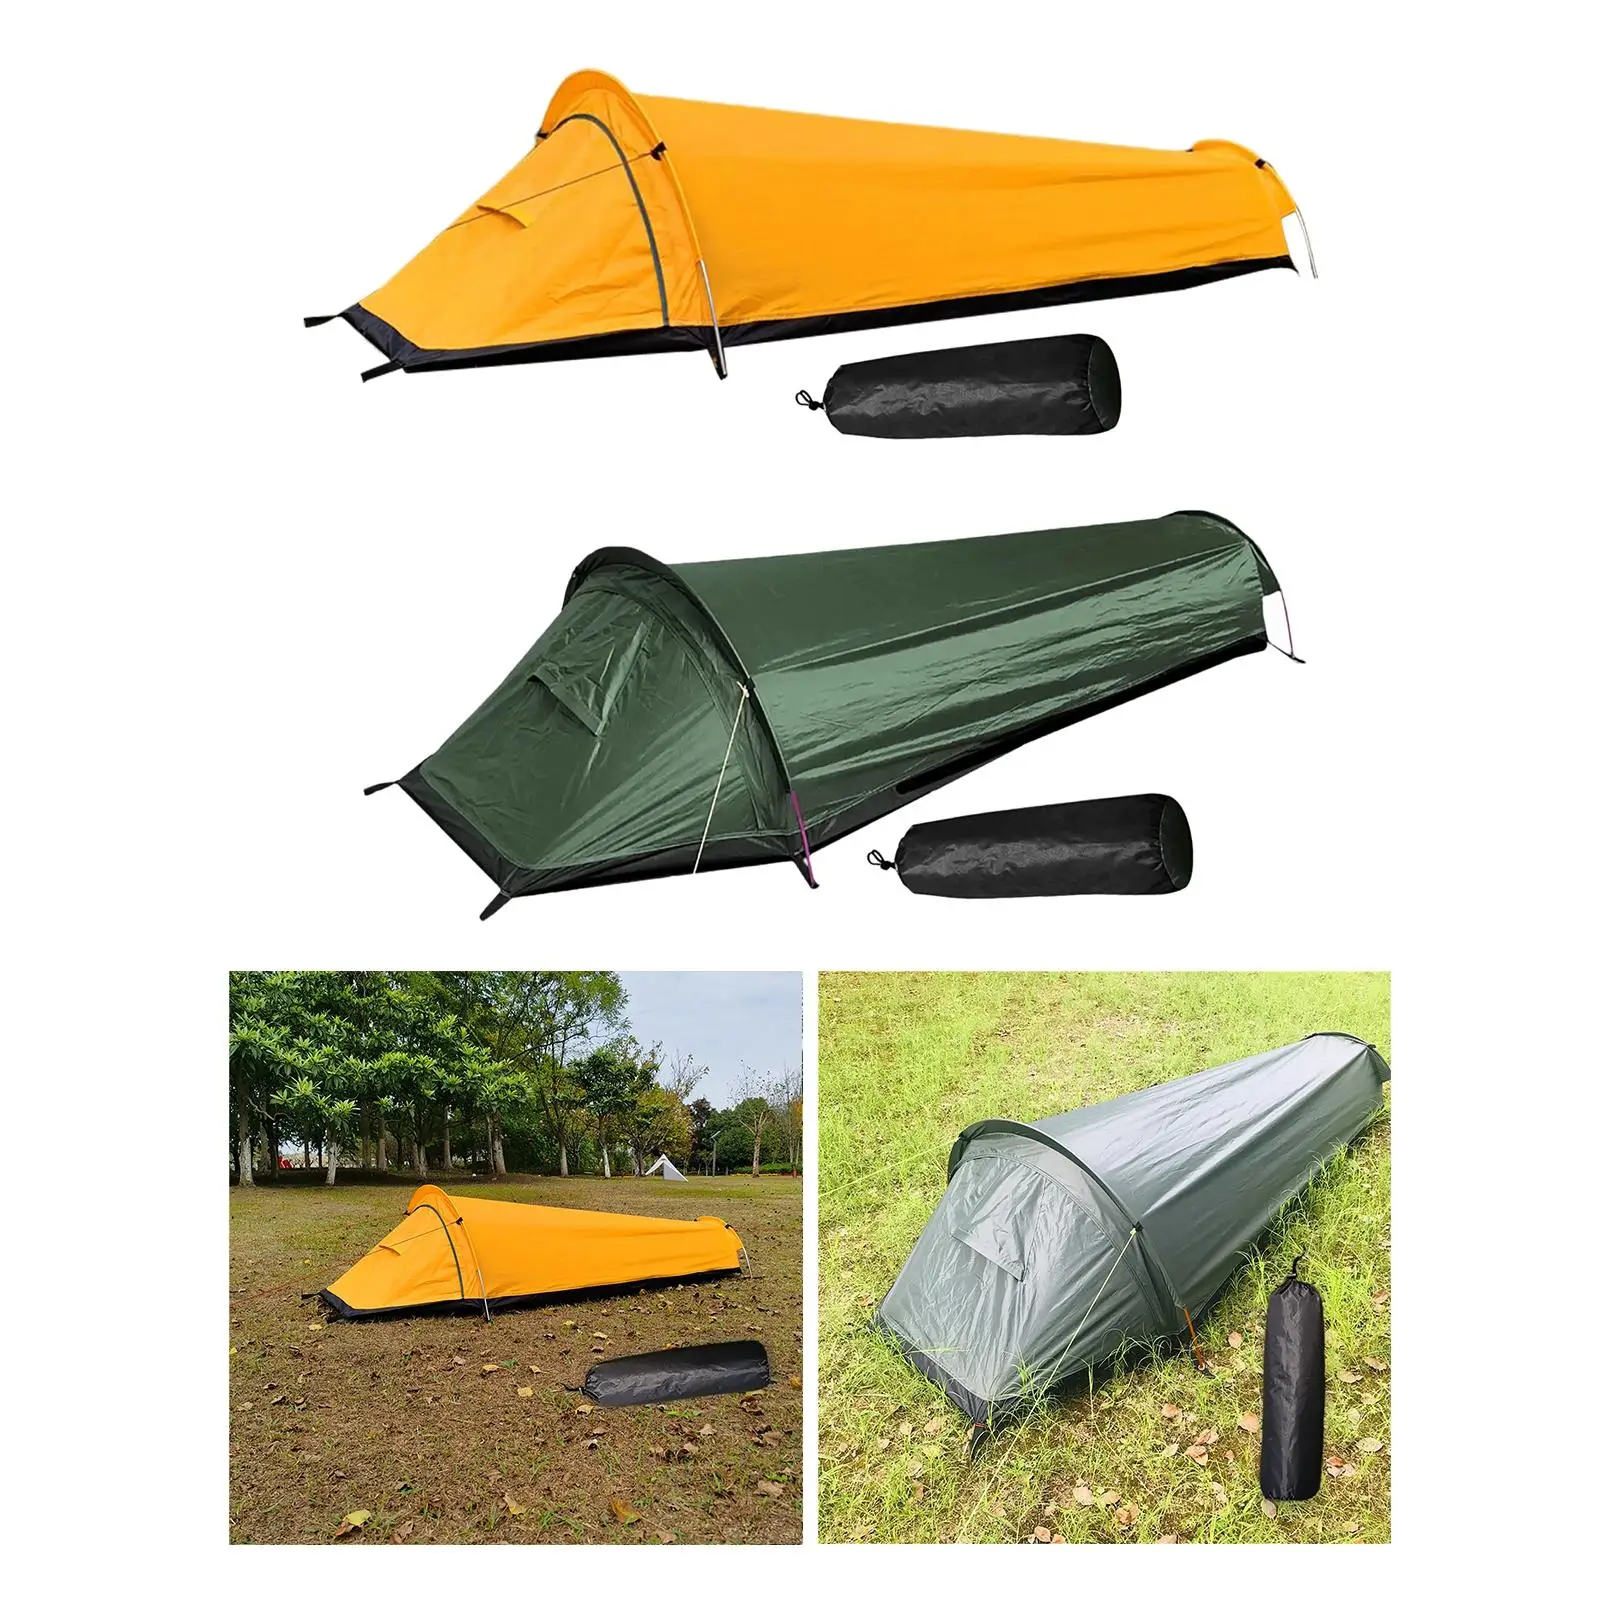 Portable Camping Tent Waterproof Single Person Easy Set up Bushcraft Shelter for All Seasons Backpacking Fishing Survival Beach